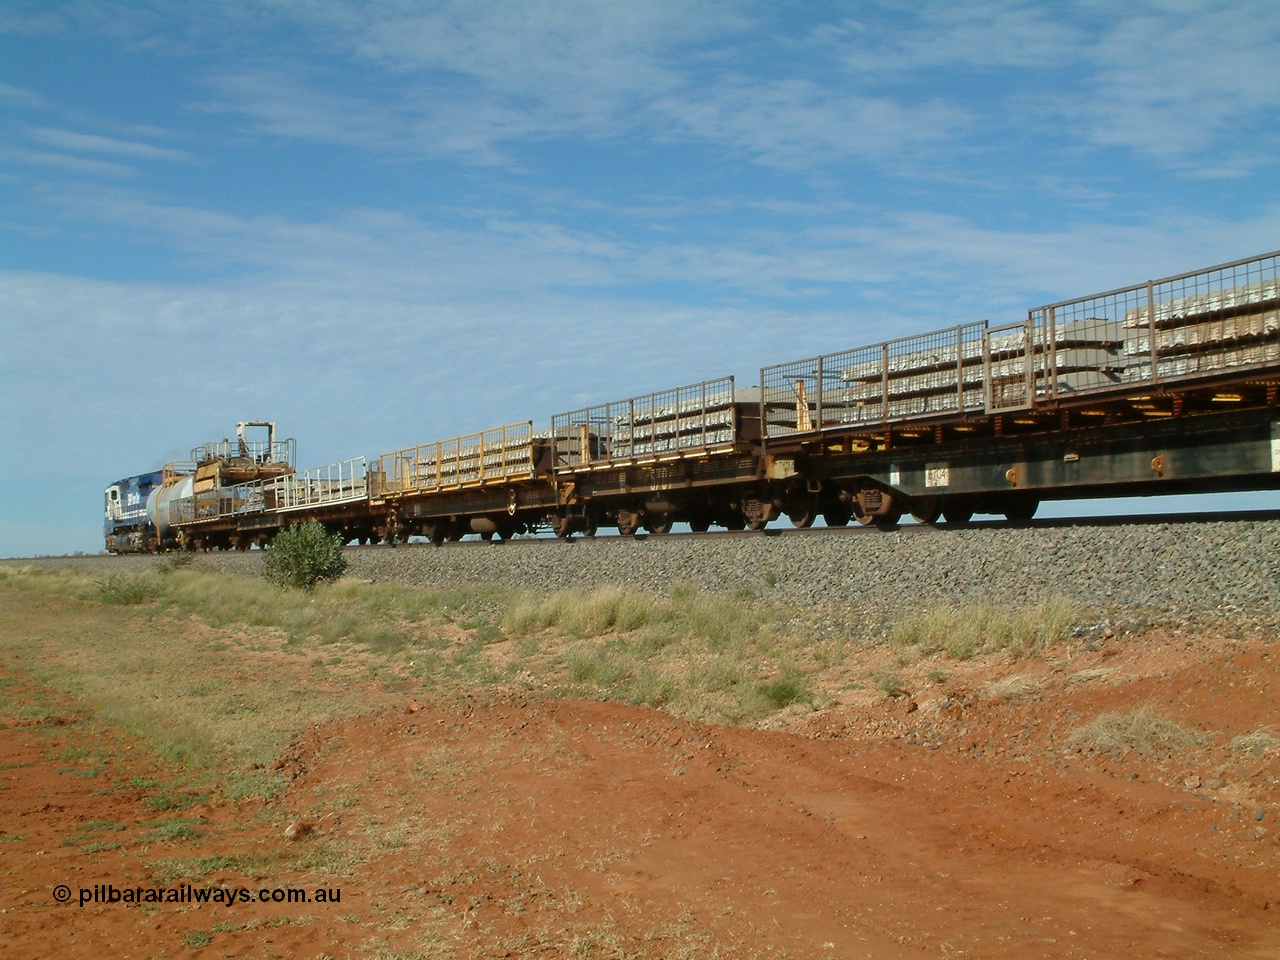 040502 085554
Mooka Siding, trailing view of the 'Pony' heading south, 50 ton waggon 6701, one of three 'special' waggons converted from Magor USA built ore waggons, loaded with concrete sleepers is in the middle with former Goldsworthy flat waggon 8704 closet to camera. 
Keywords: Magor-USA;BHP-pony-waggon;